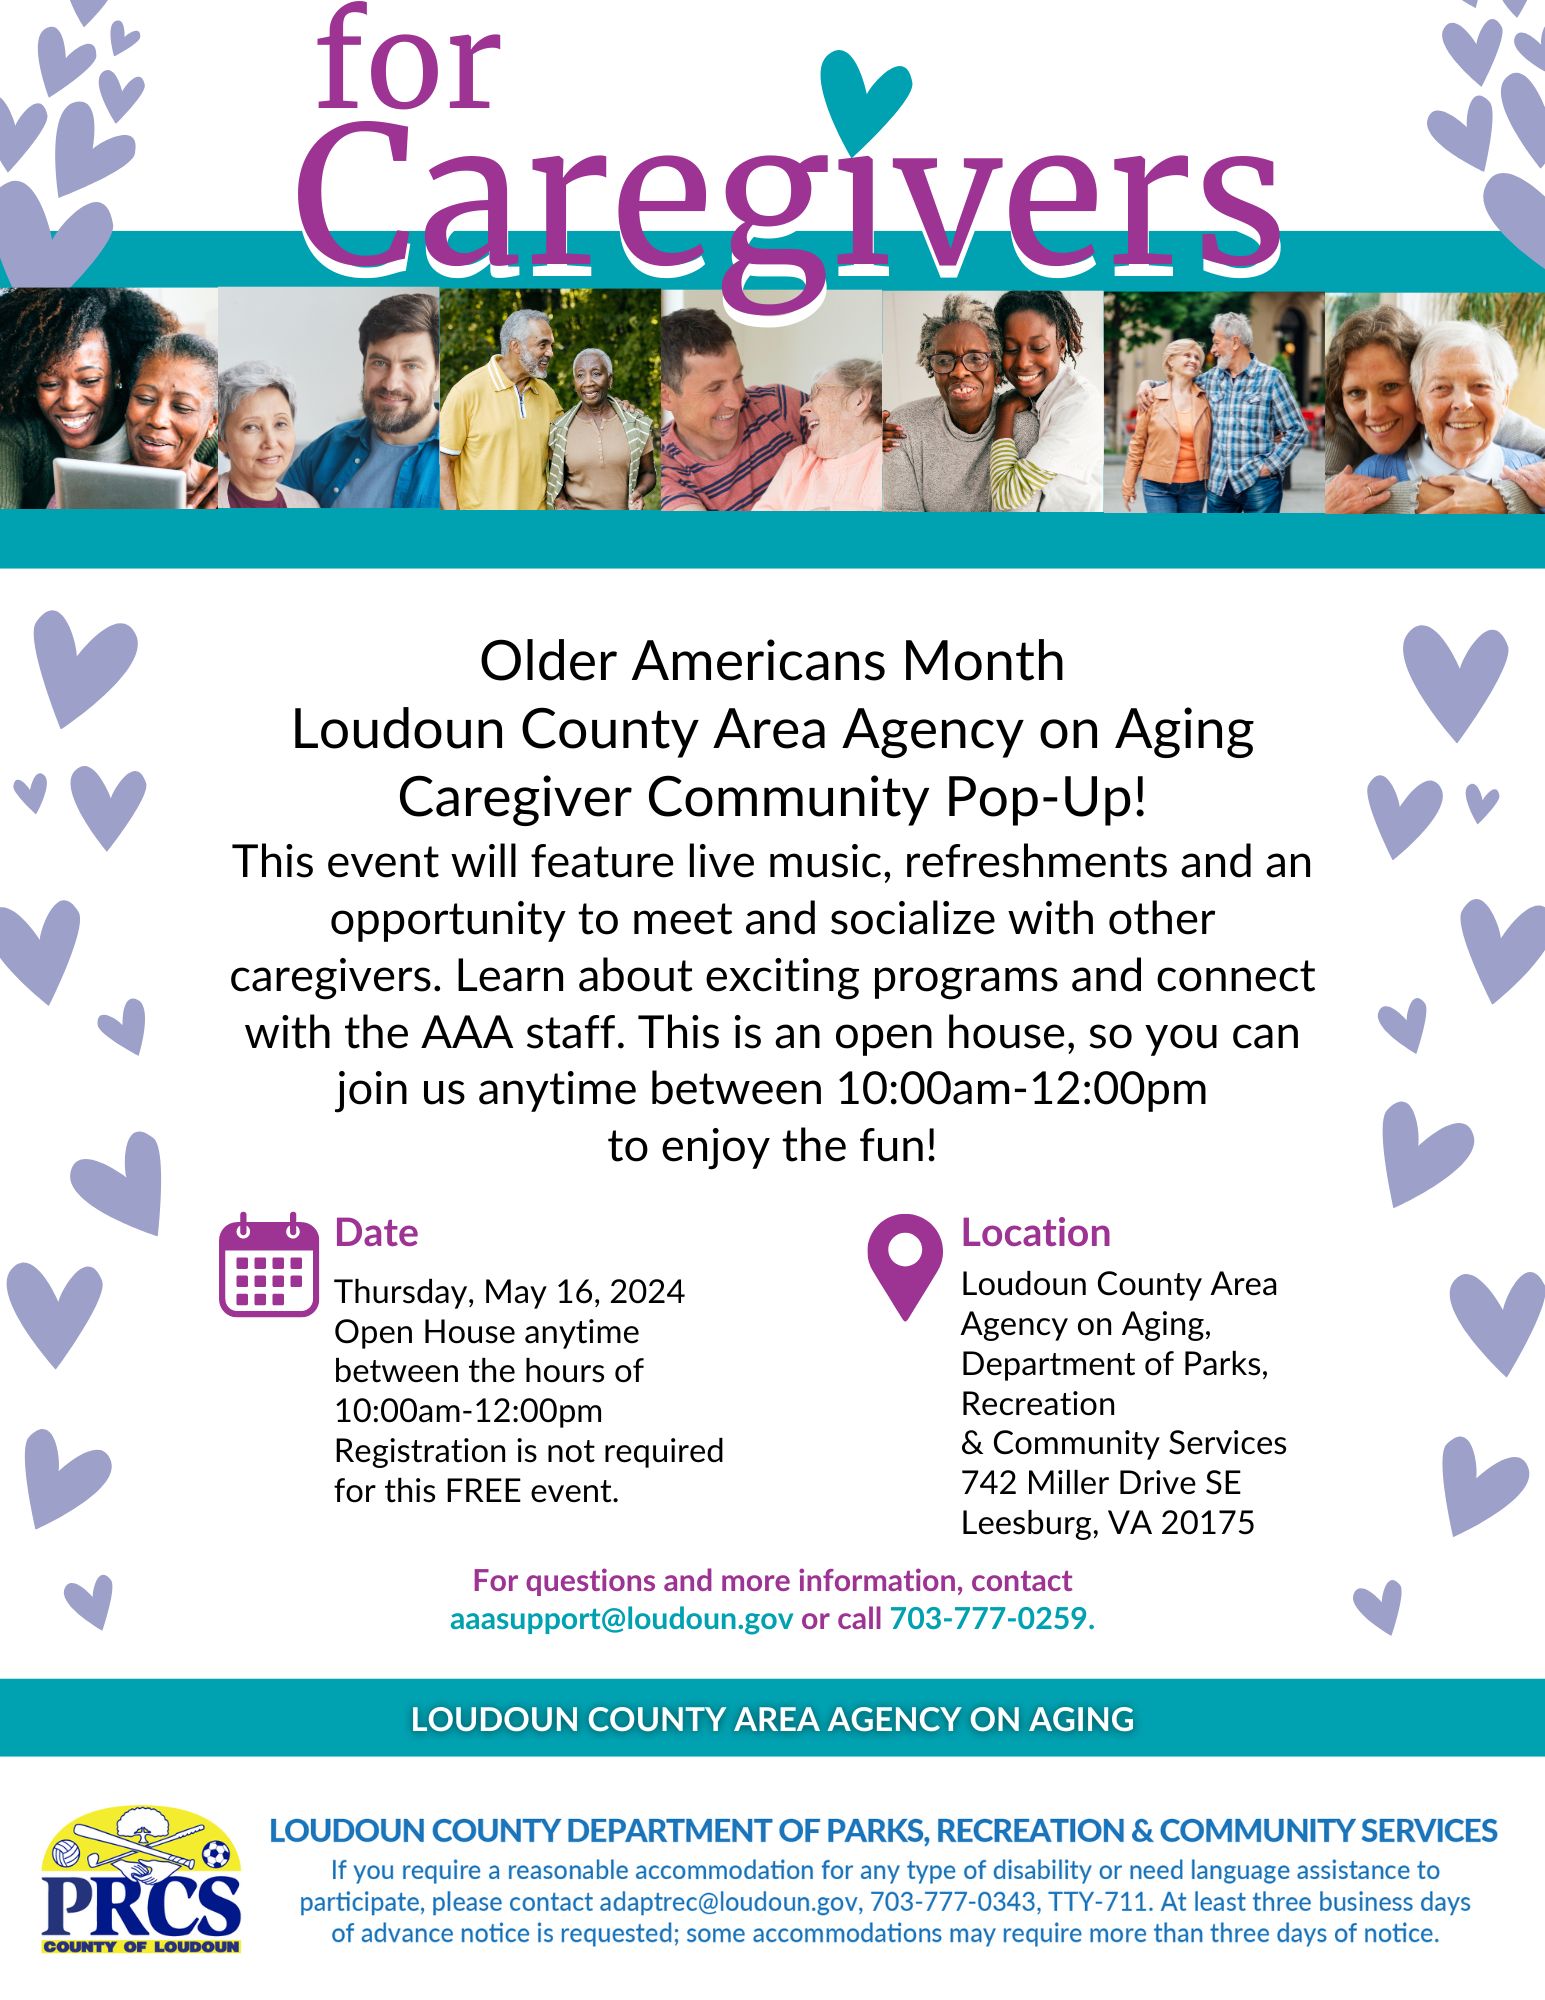 Loudoun County Area Agency on Aging Caregiver Community Pop-Up